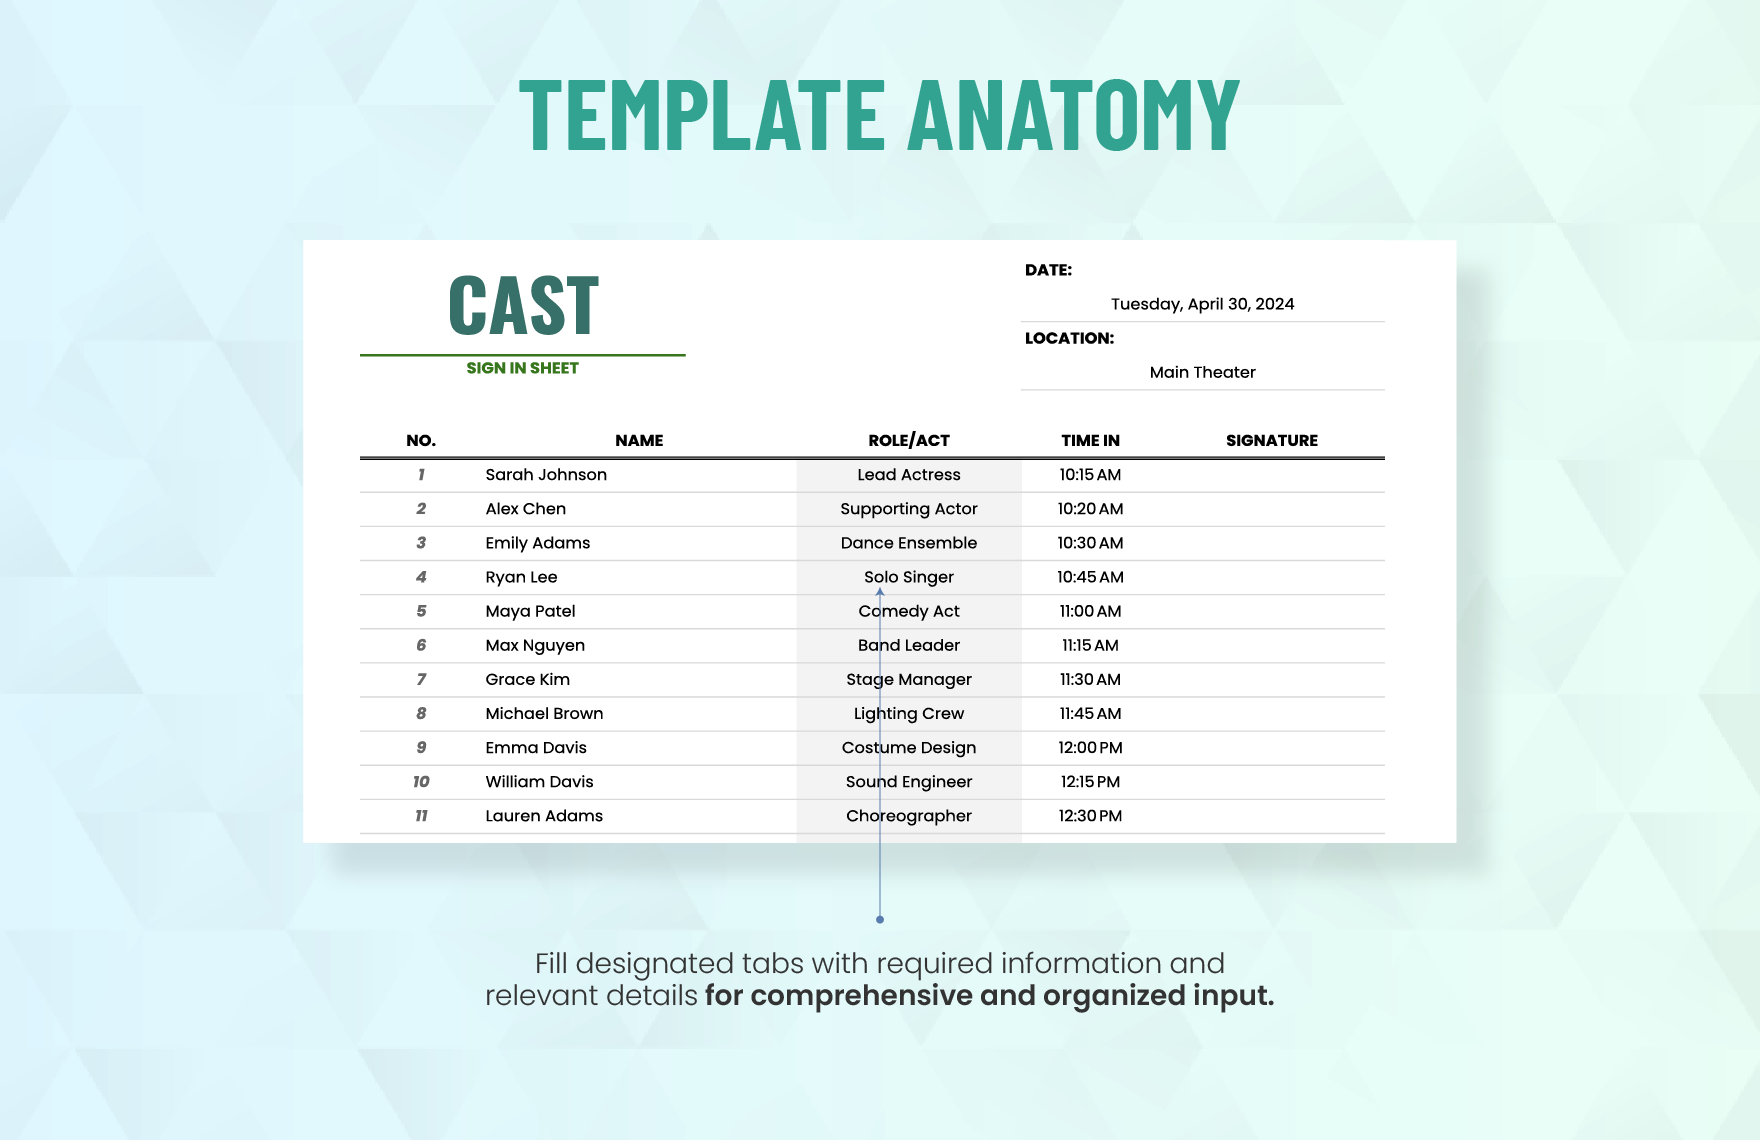 Cast Sign in Sheet Daily Template